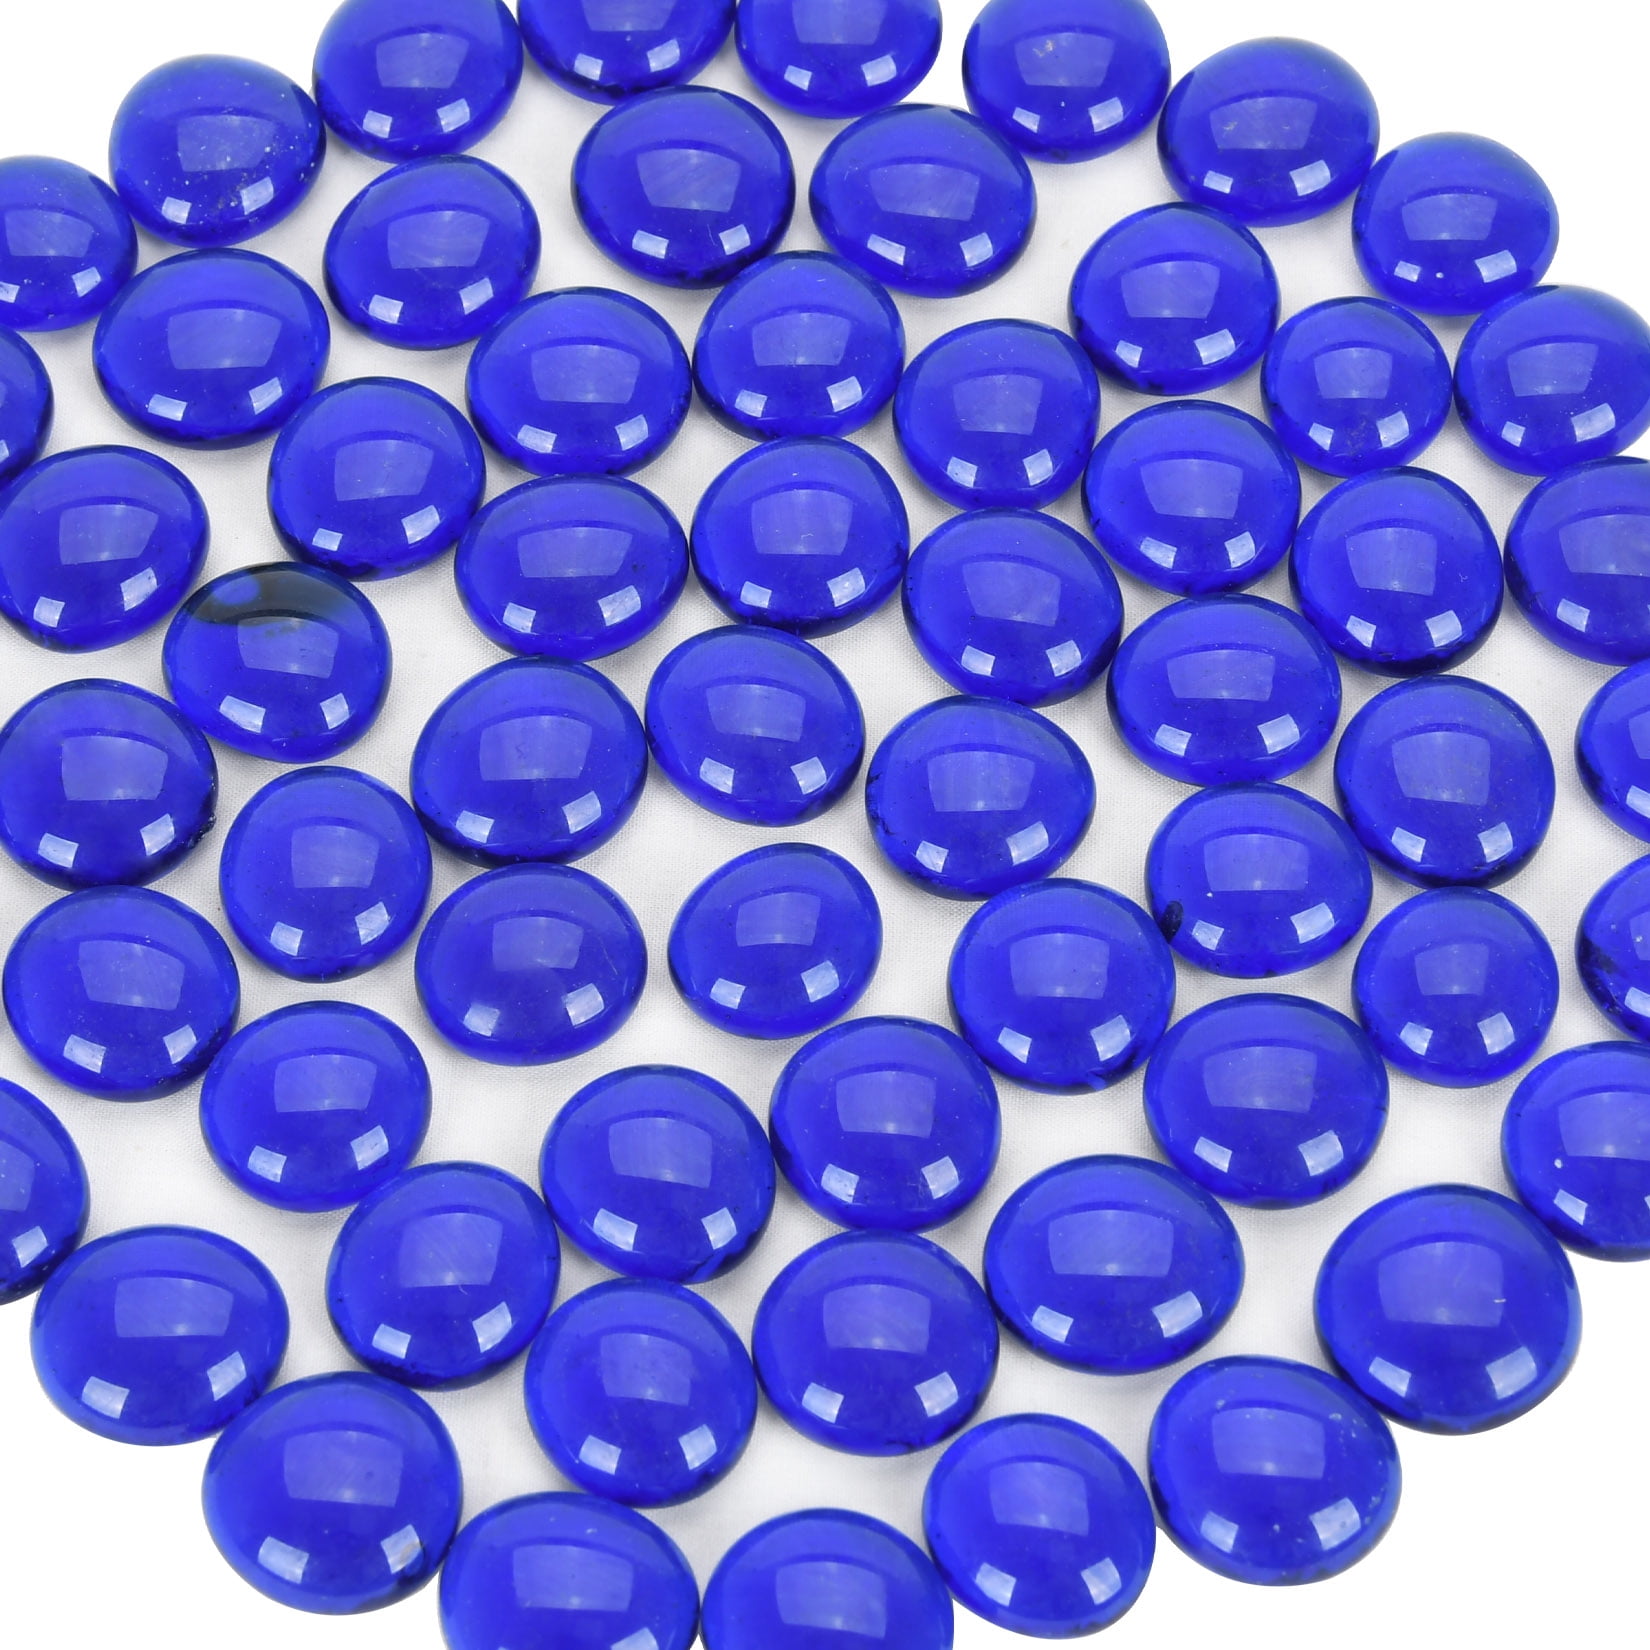 GasSaf Blue Fire Glass Beads for Outdoor Fire Pit, Fireplace and fire Pit  Table, 3/4 Inch Glass(10 Pound)(Cobalt Blue)